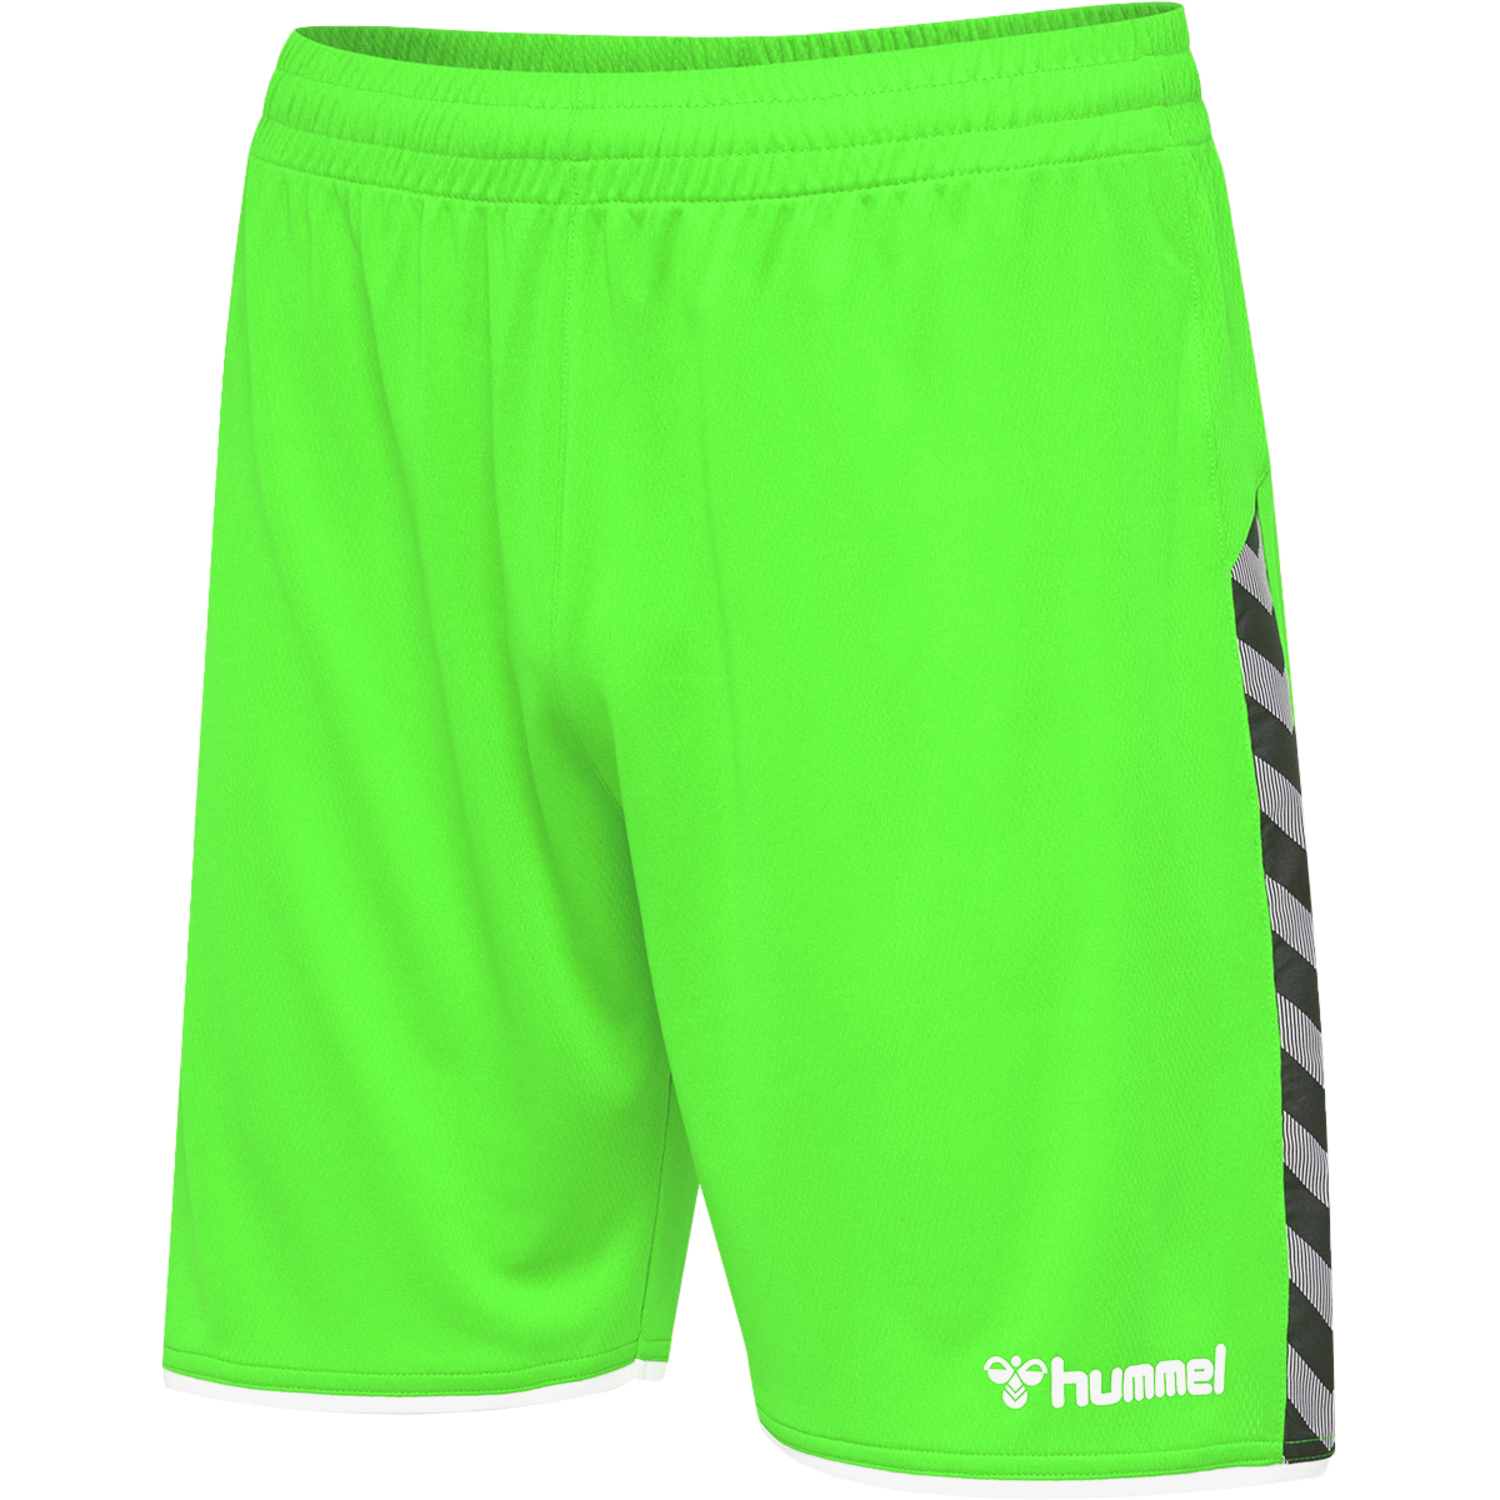 hummel AUTHENTIC KIDS POLY SHORTS - GREEN GECKO